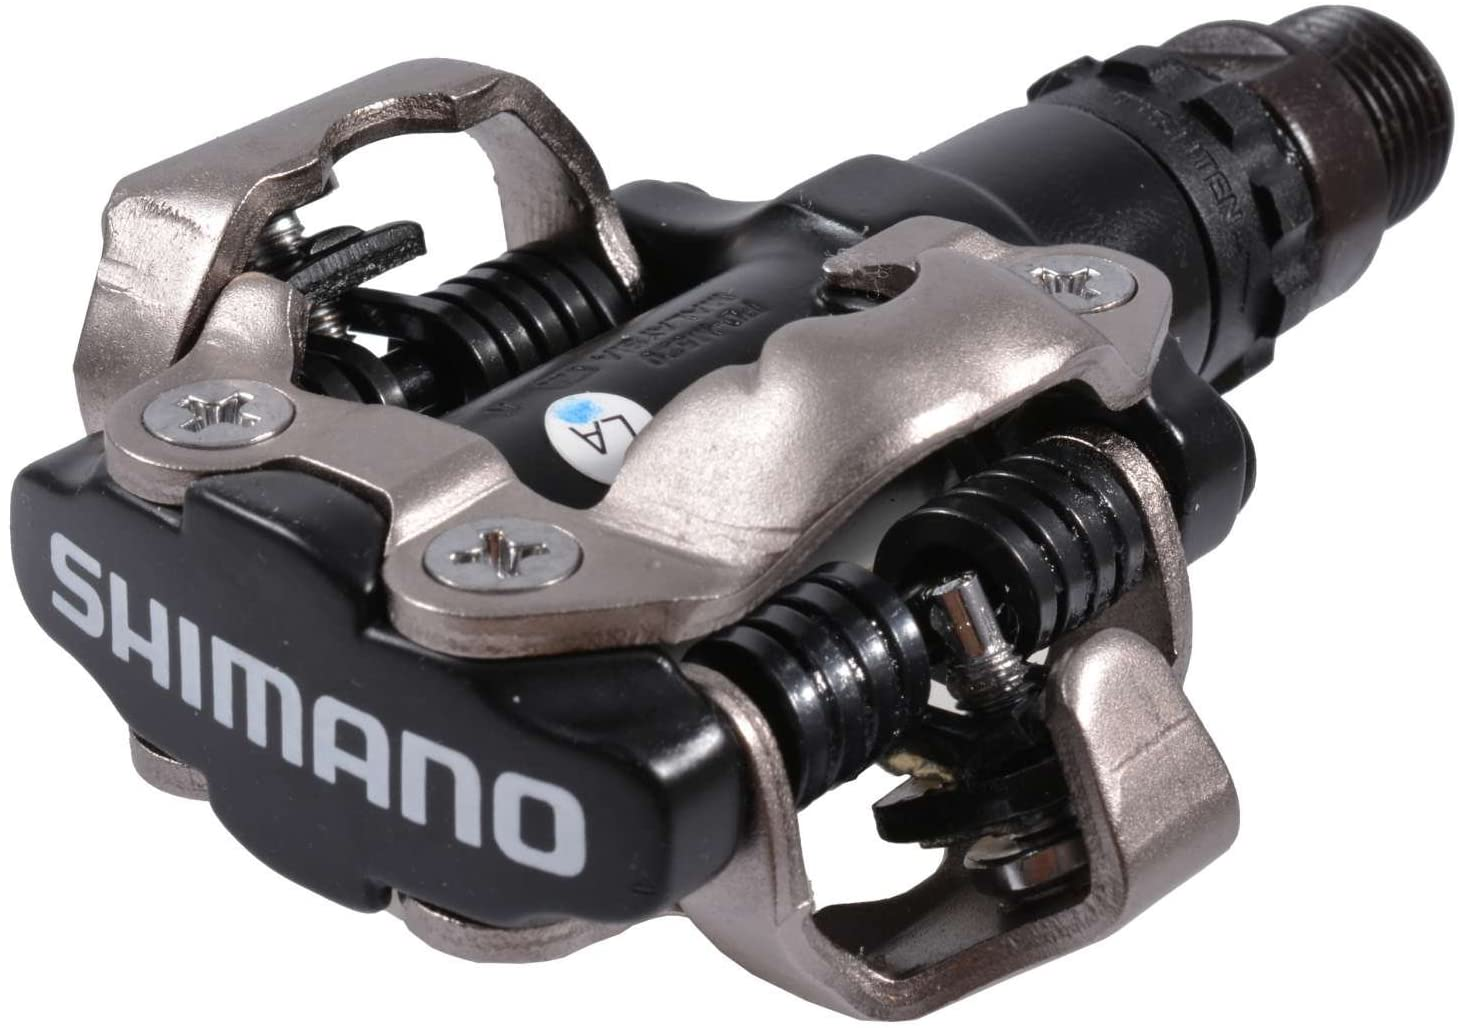 Clipless pedals provide a secure connection between your feet and the pedals enabling you to pedal faster and with more power.